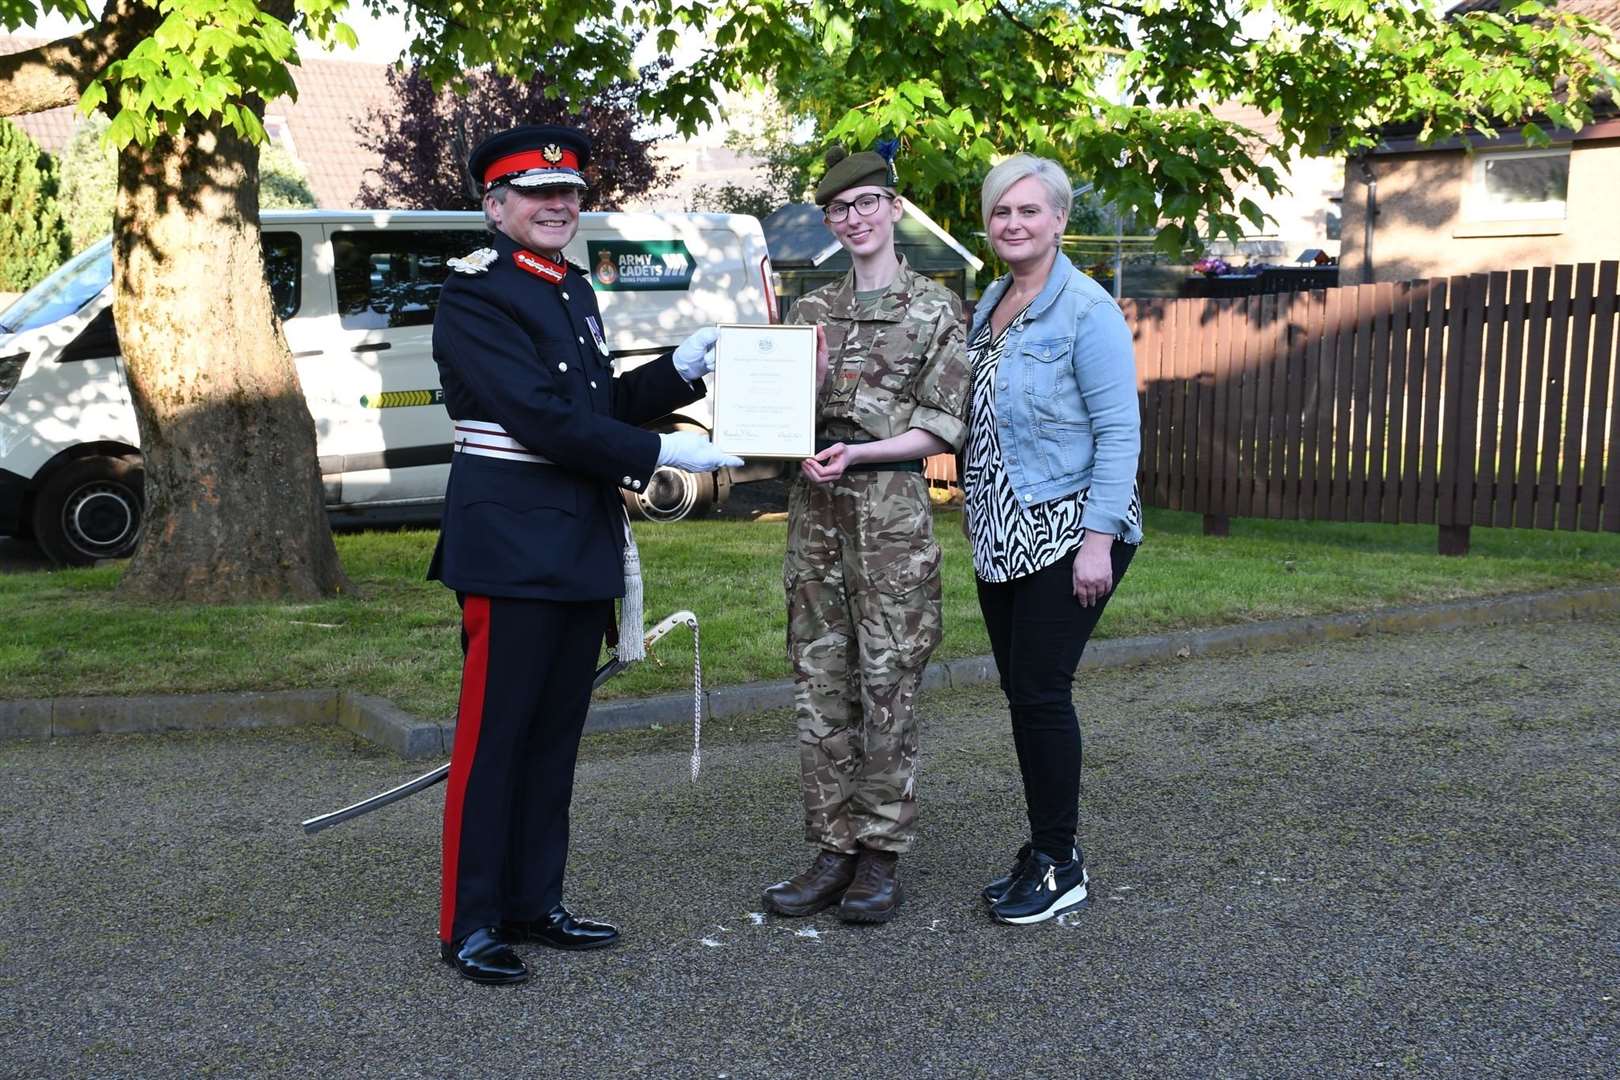 Corporal Stella Walker accepting her certificate from The Lord Lieutenant watched by a proud mum.